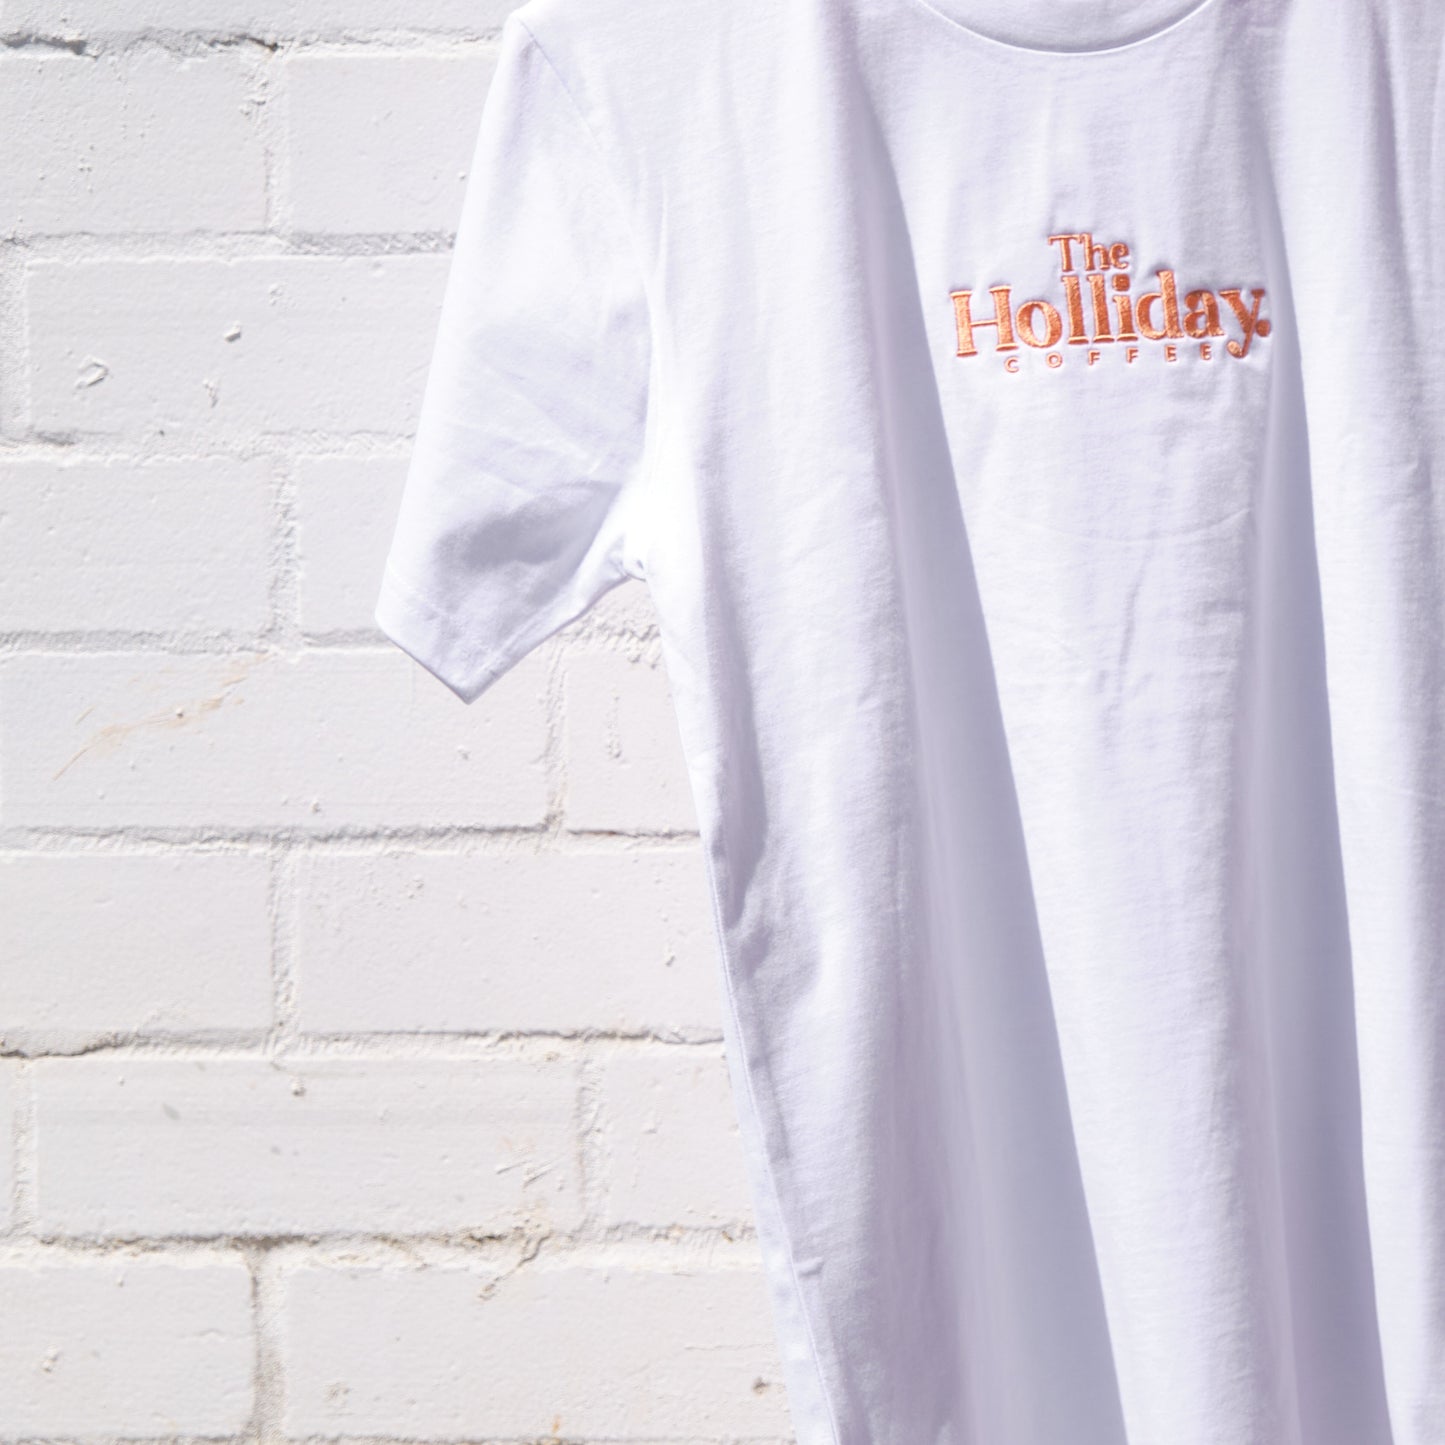 The Holliday. Classic Tee White